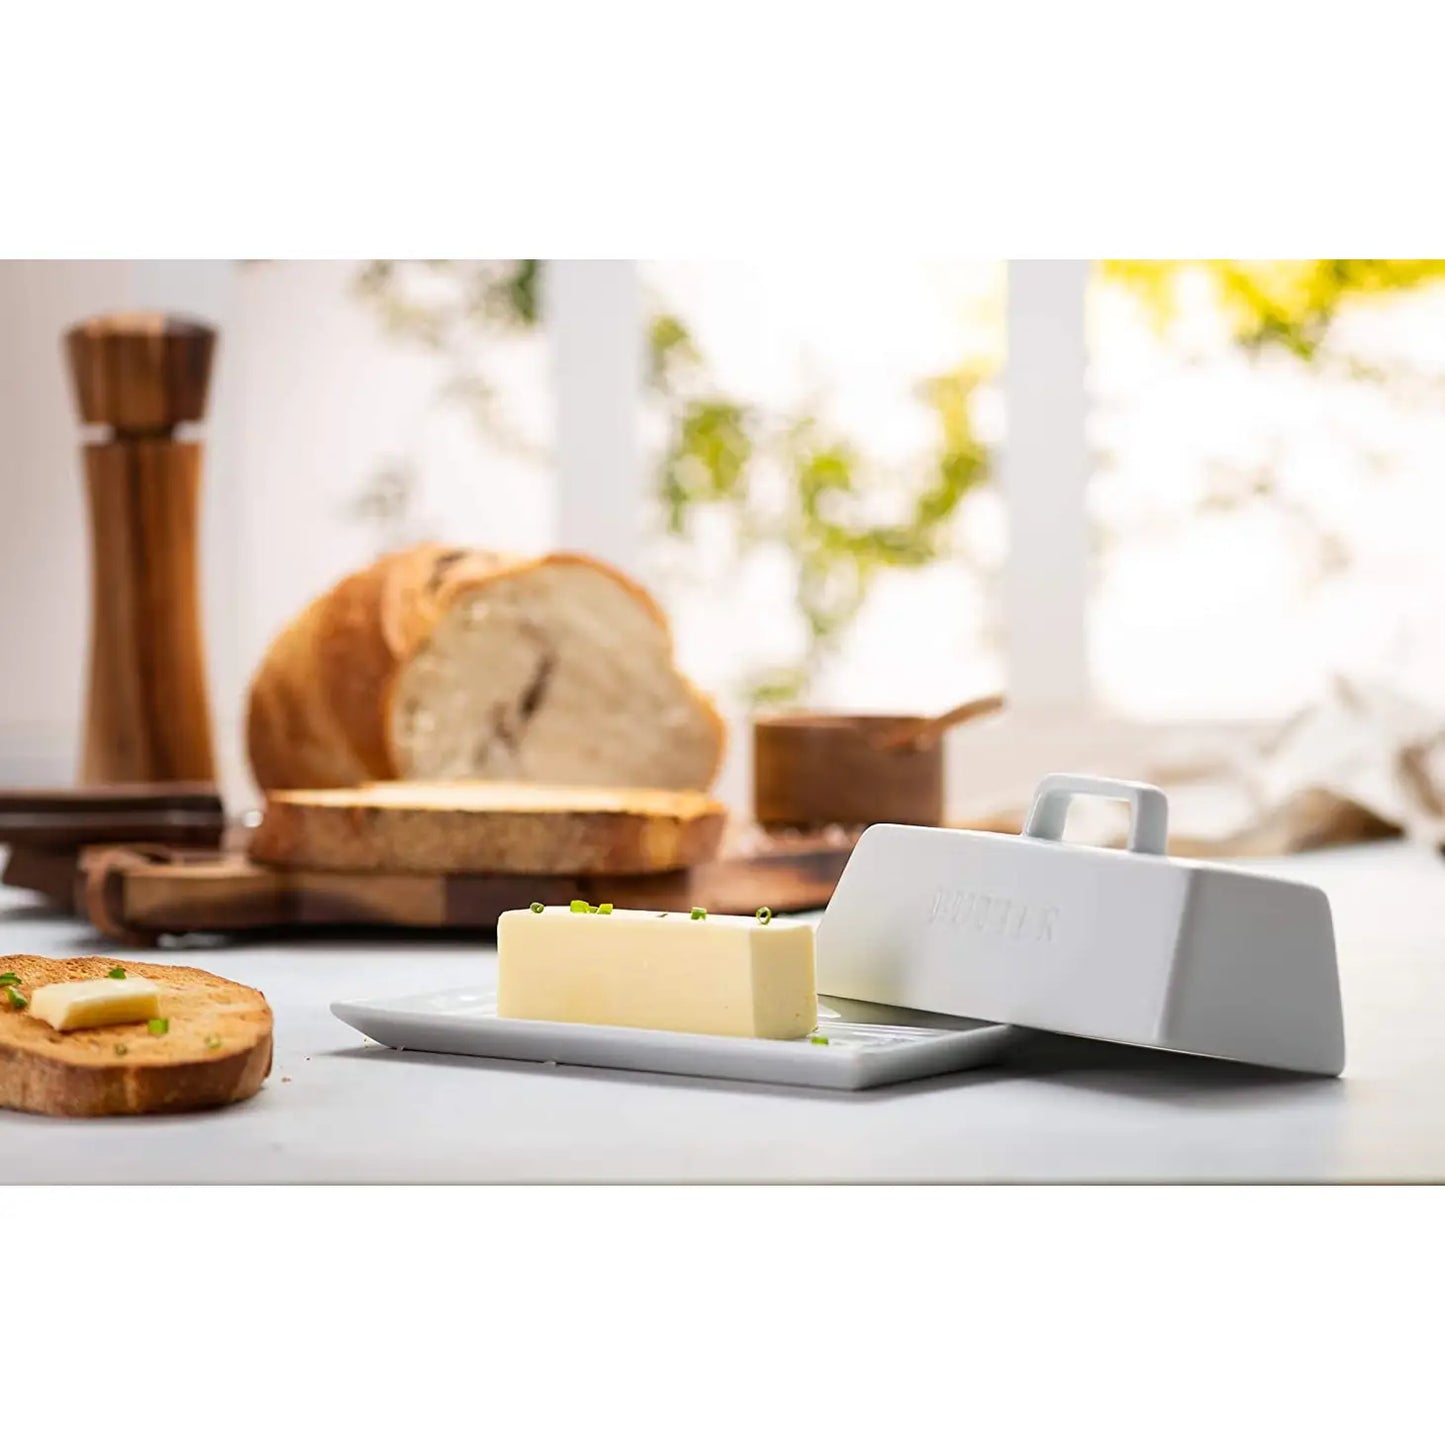 Butter Dish - Curated Home Decor